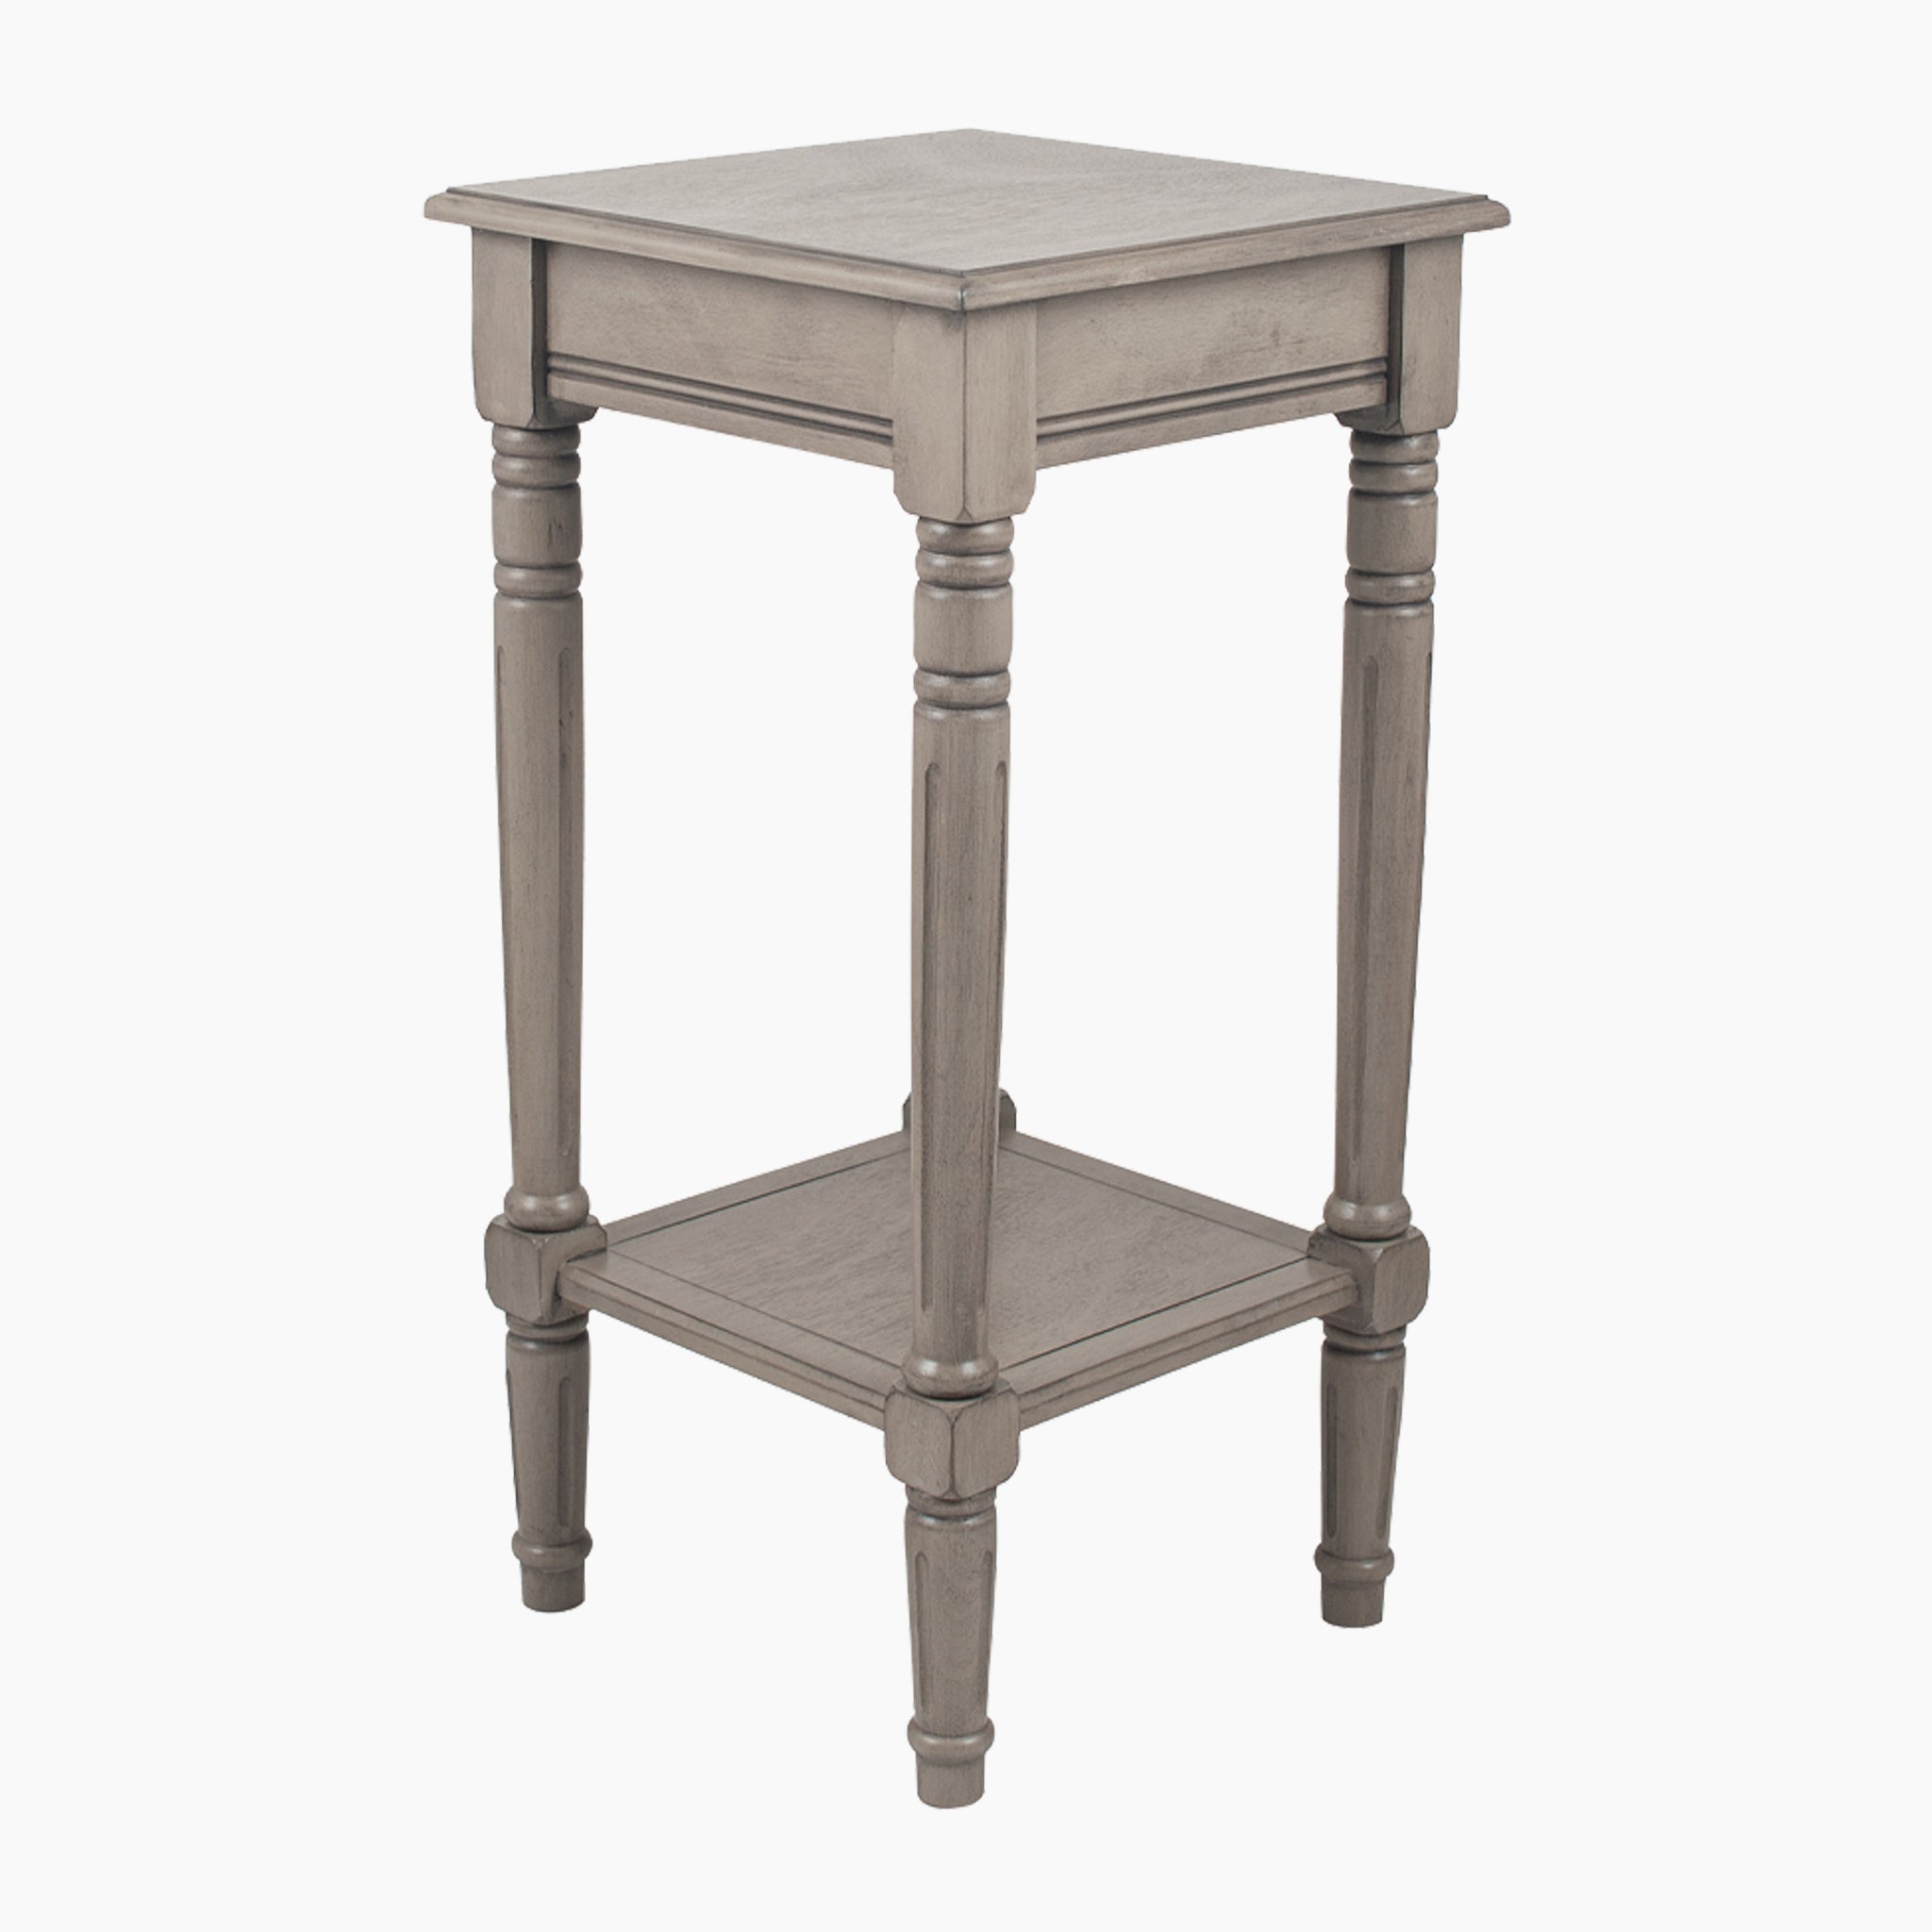 Heritage Taupe Pine Wood Square Accent Table